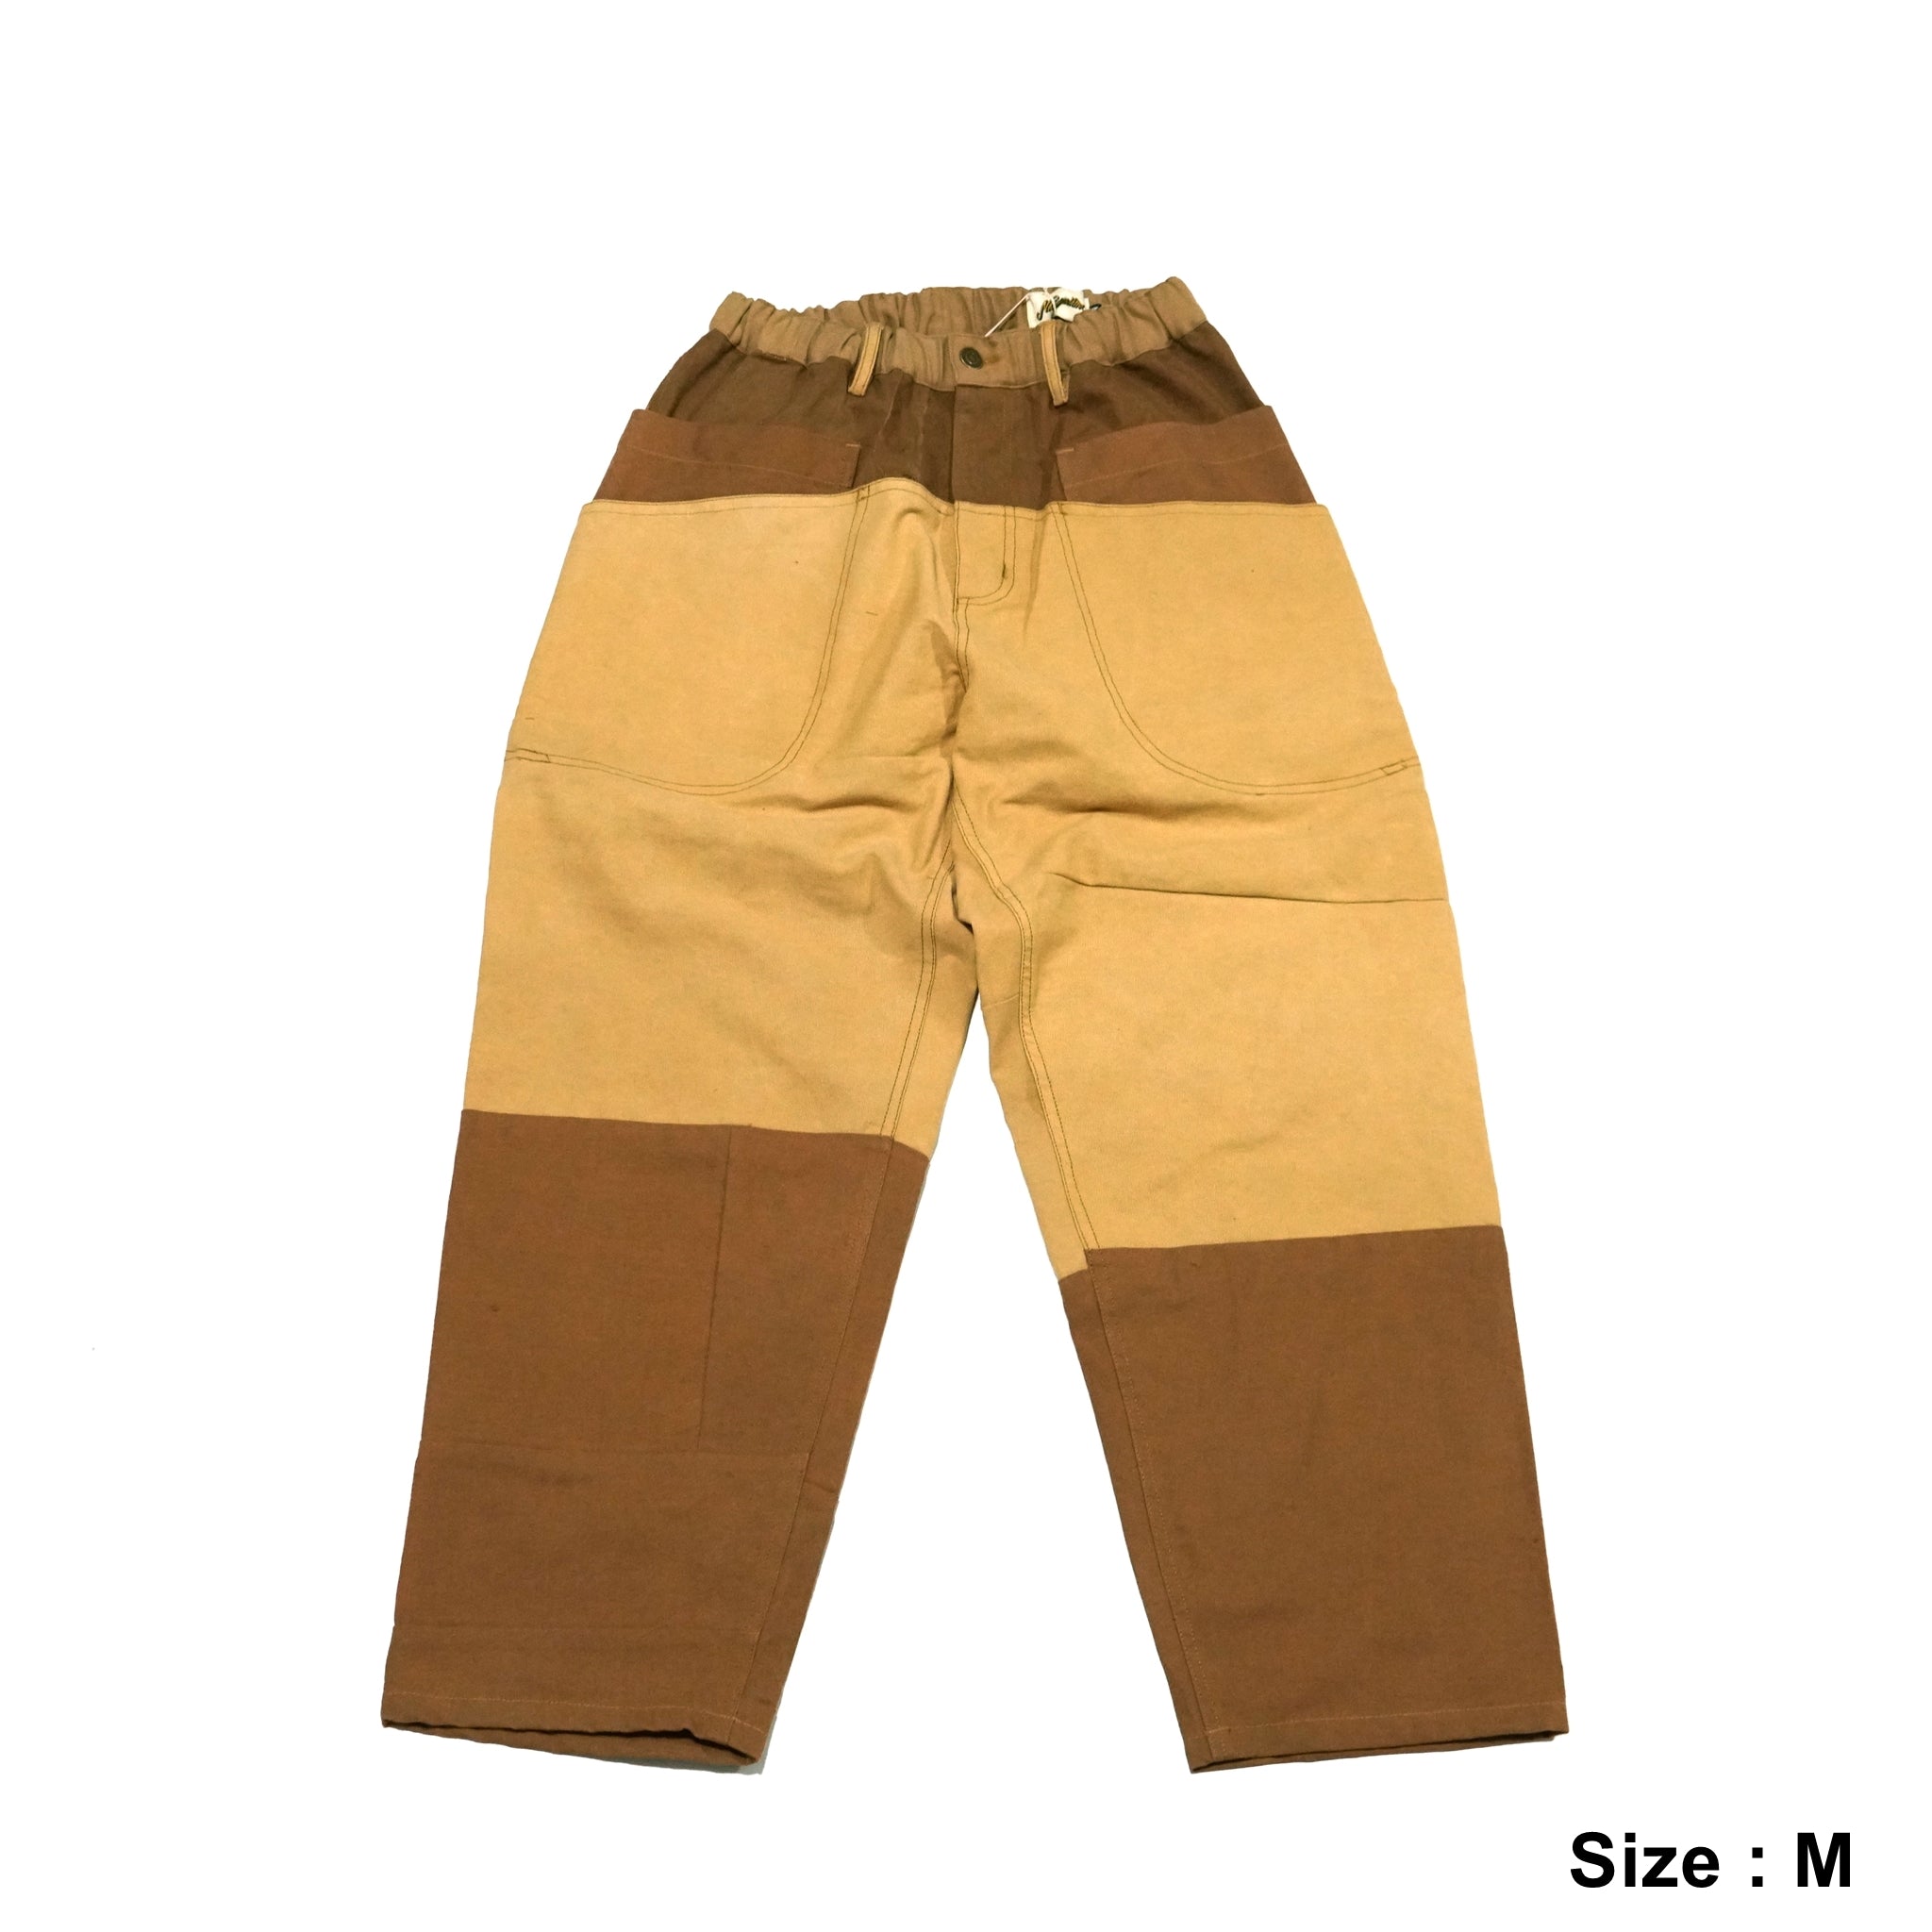 No:RP0504301_a | Name:MOOSE PANTS | Color:02-Duck【NASNGWAM_ナスングワム】